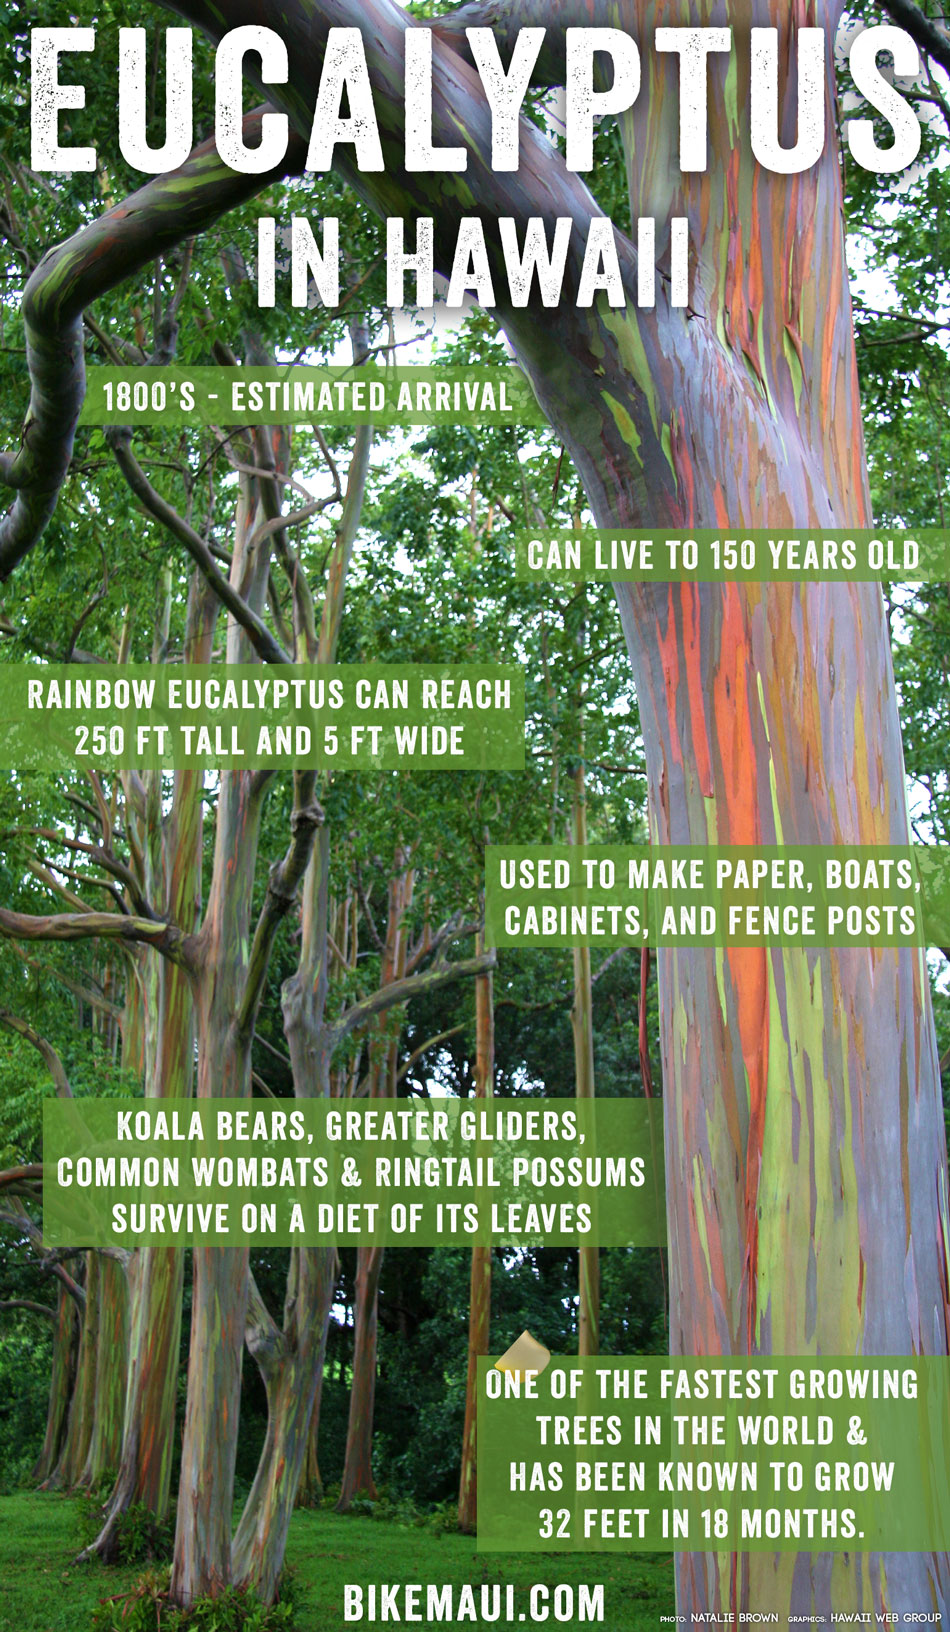 Rainbow eucalyptus bark constantly changes its color